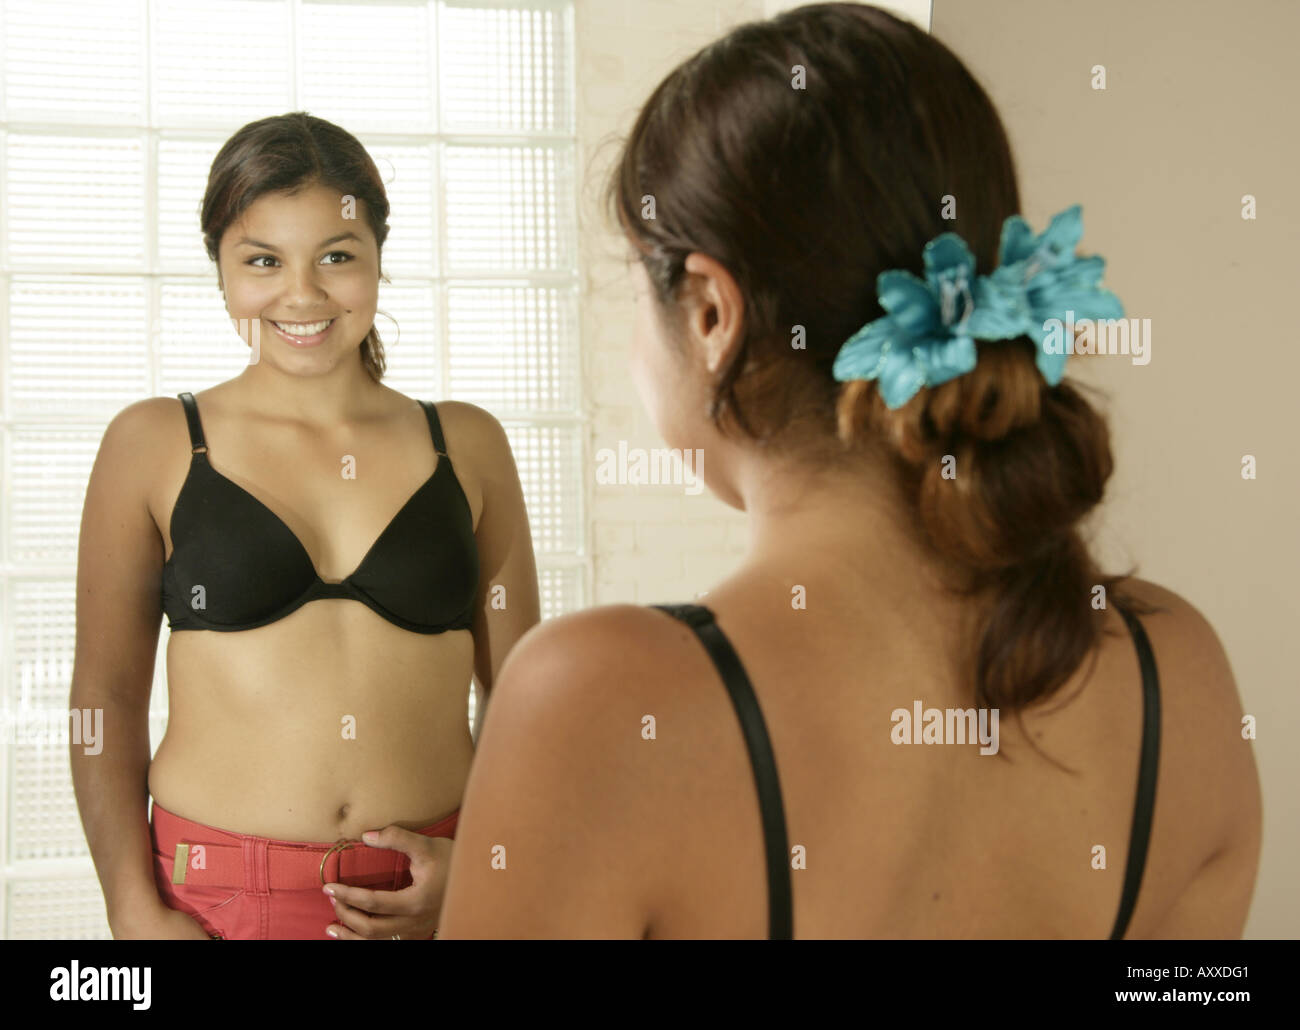 Young girl is happy with her looks as she checks herself out using a mirror. Stock Photo